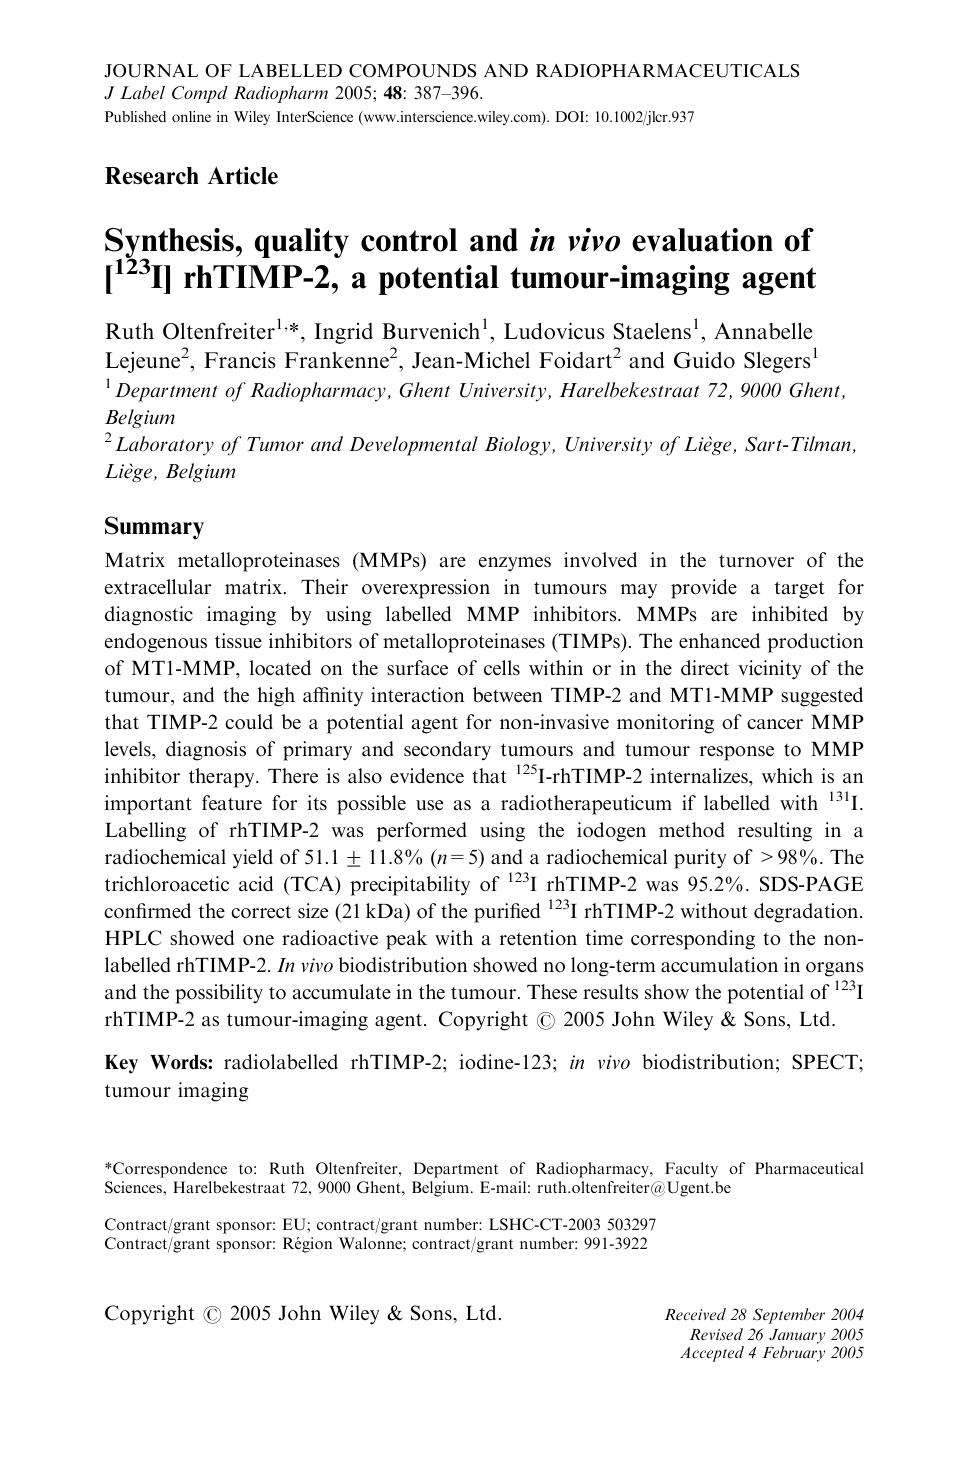 Synthesis, quality control and in vivo evaluation of [123I] rhTIMP-2, a potential tumour-imaging agent by Unknown